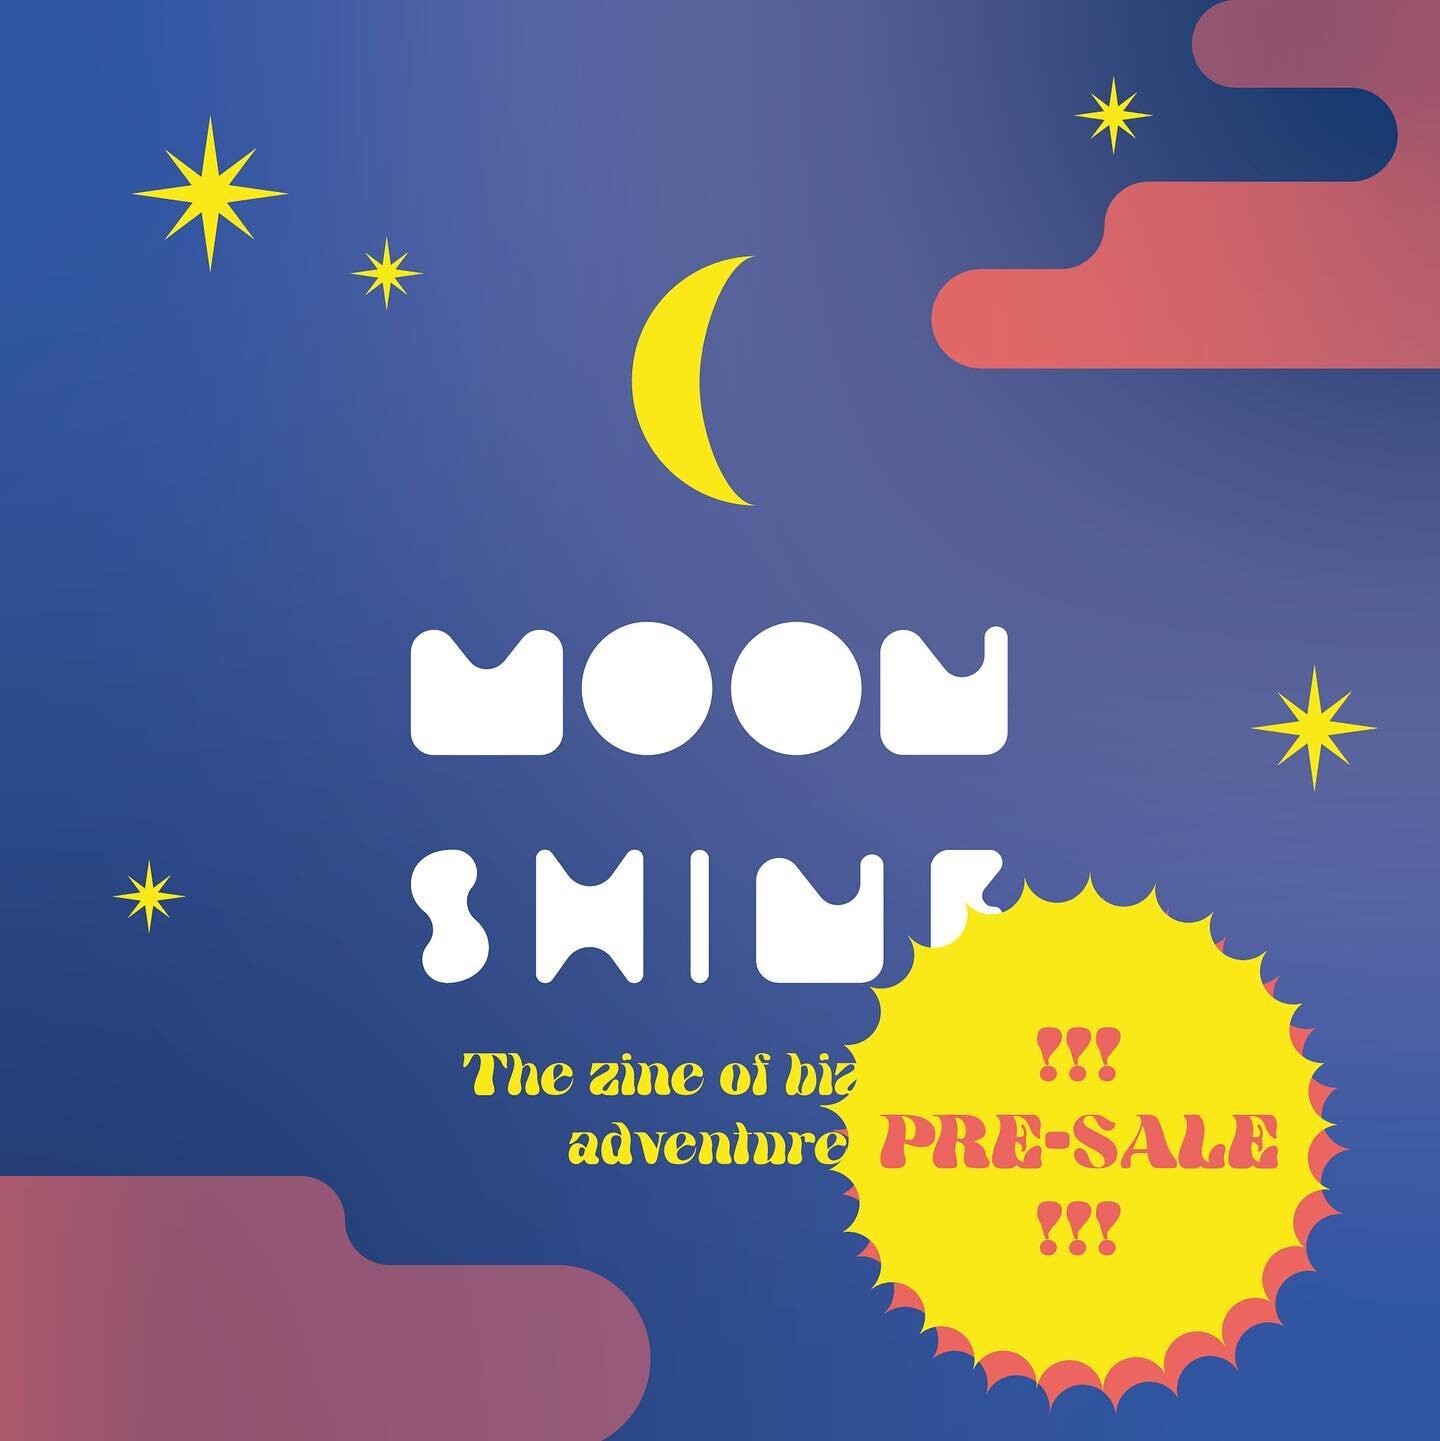 The PRE-SALE has begun! 🔥
You can go to the Pop Shop and get a copy of one of the MOONSHINE zines or a FULL PACK 🌙✨!!!

What is MOONSHINE? If you missed previous stories, this is the latest community project at Riso Pop, where we did an open call a